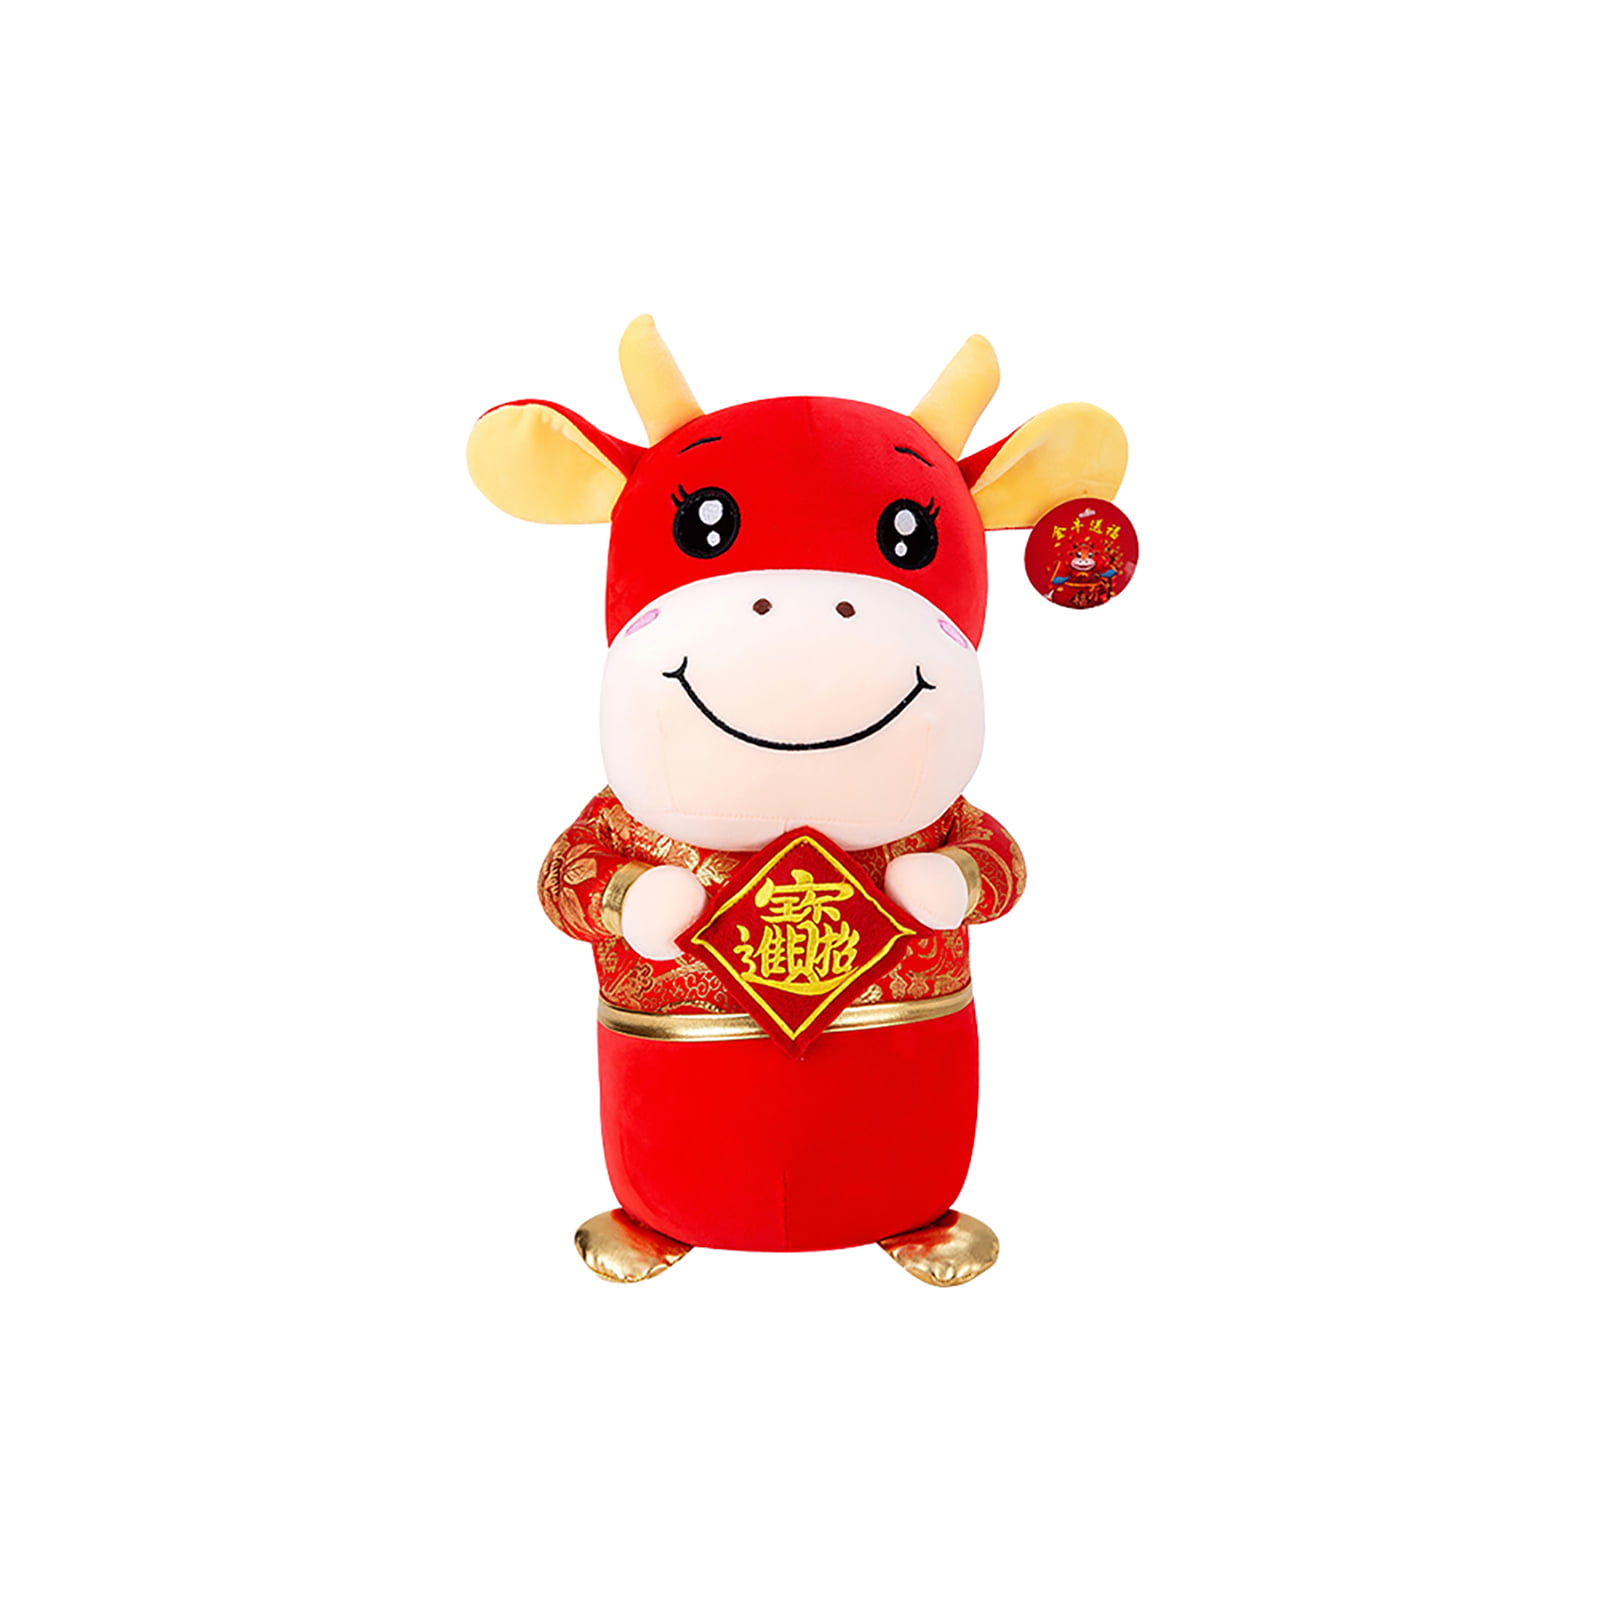 Details about   Colorful Cow Stuffed Animal Cow Cartoon Animal Plush Soft Doll Toy For Kids 30cm 